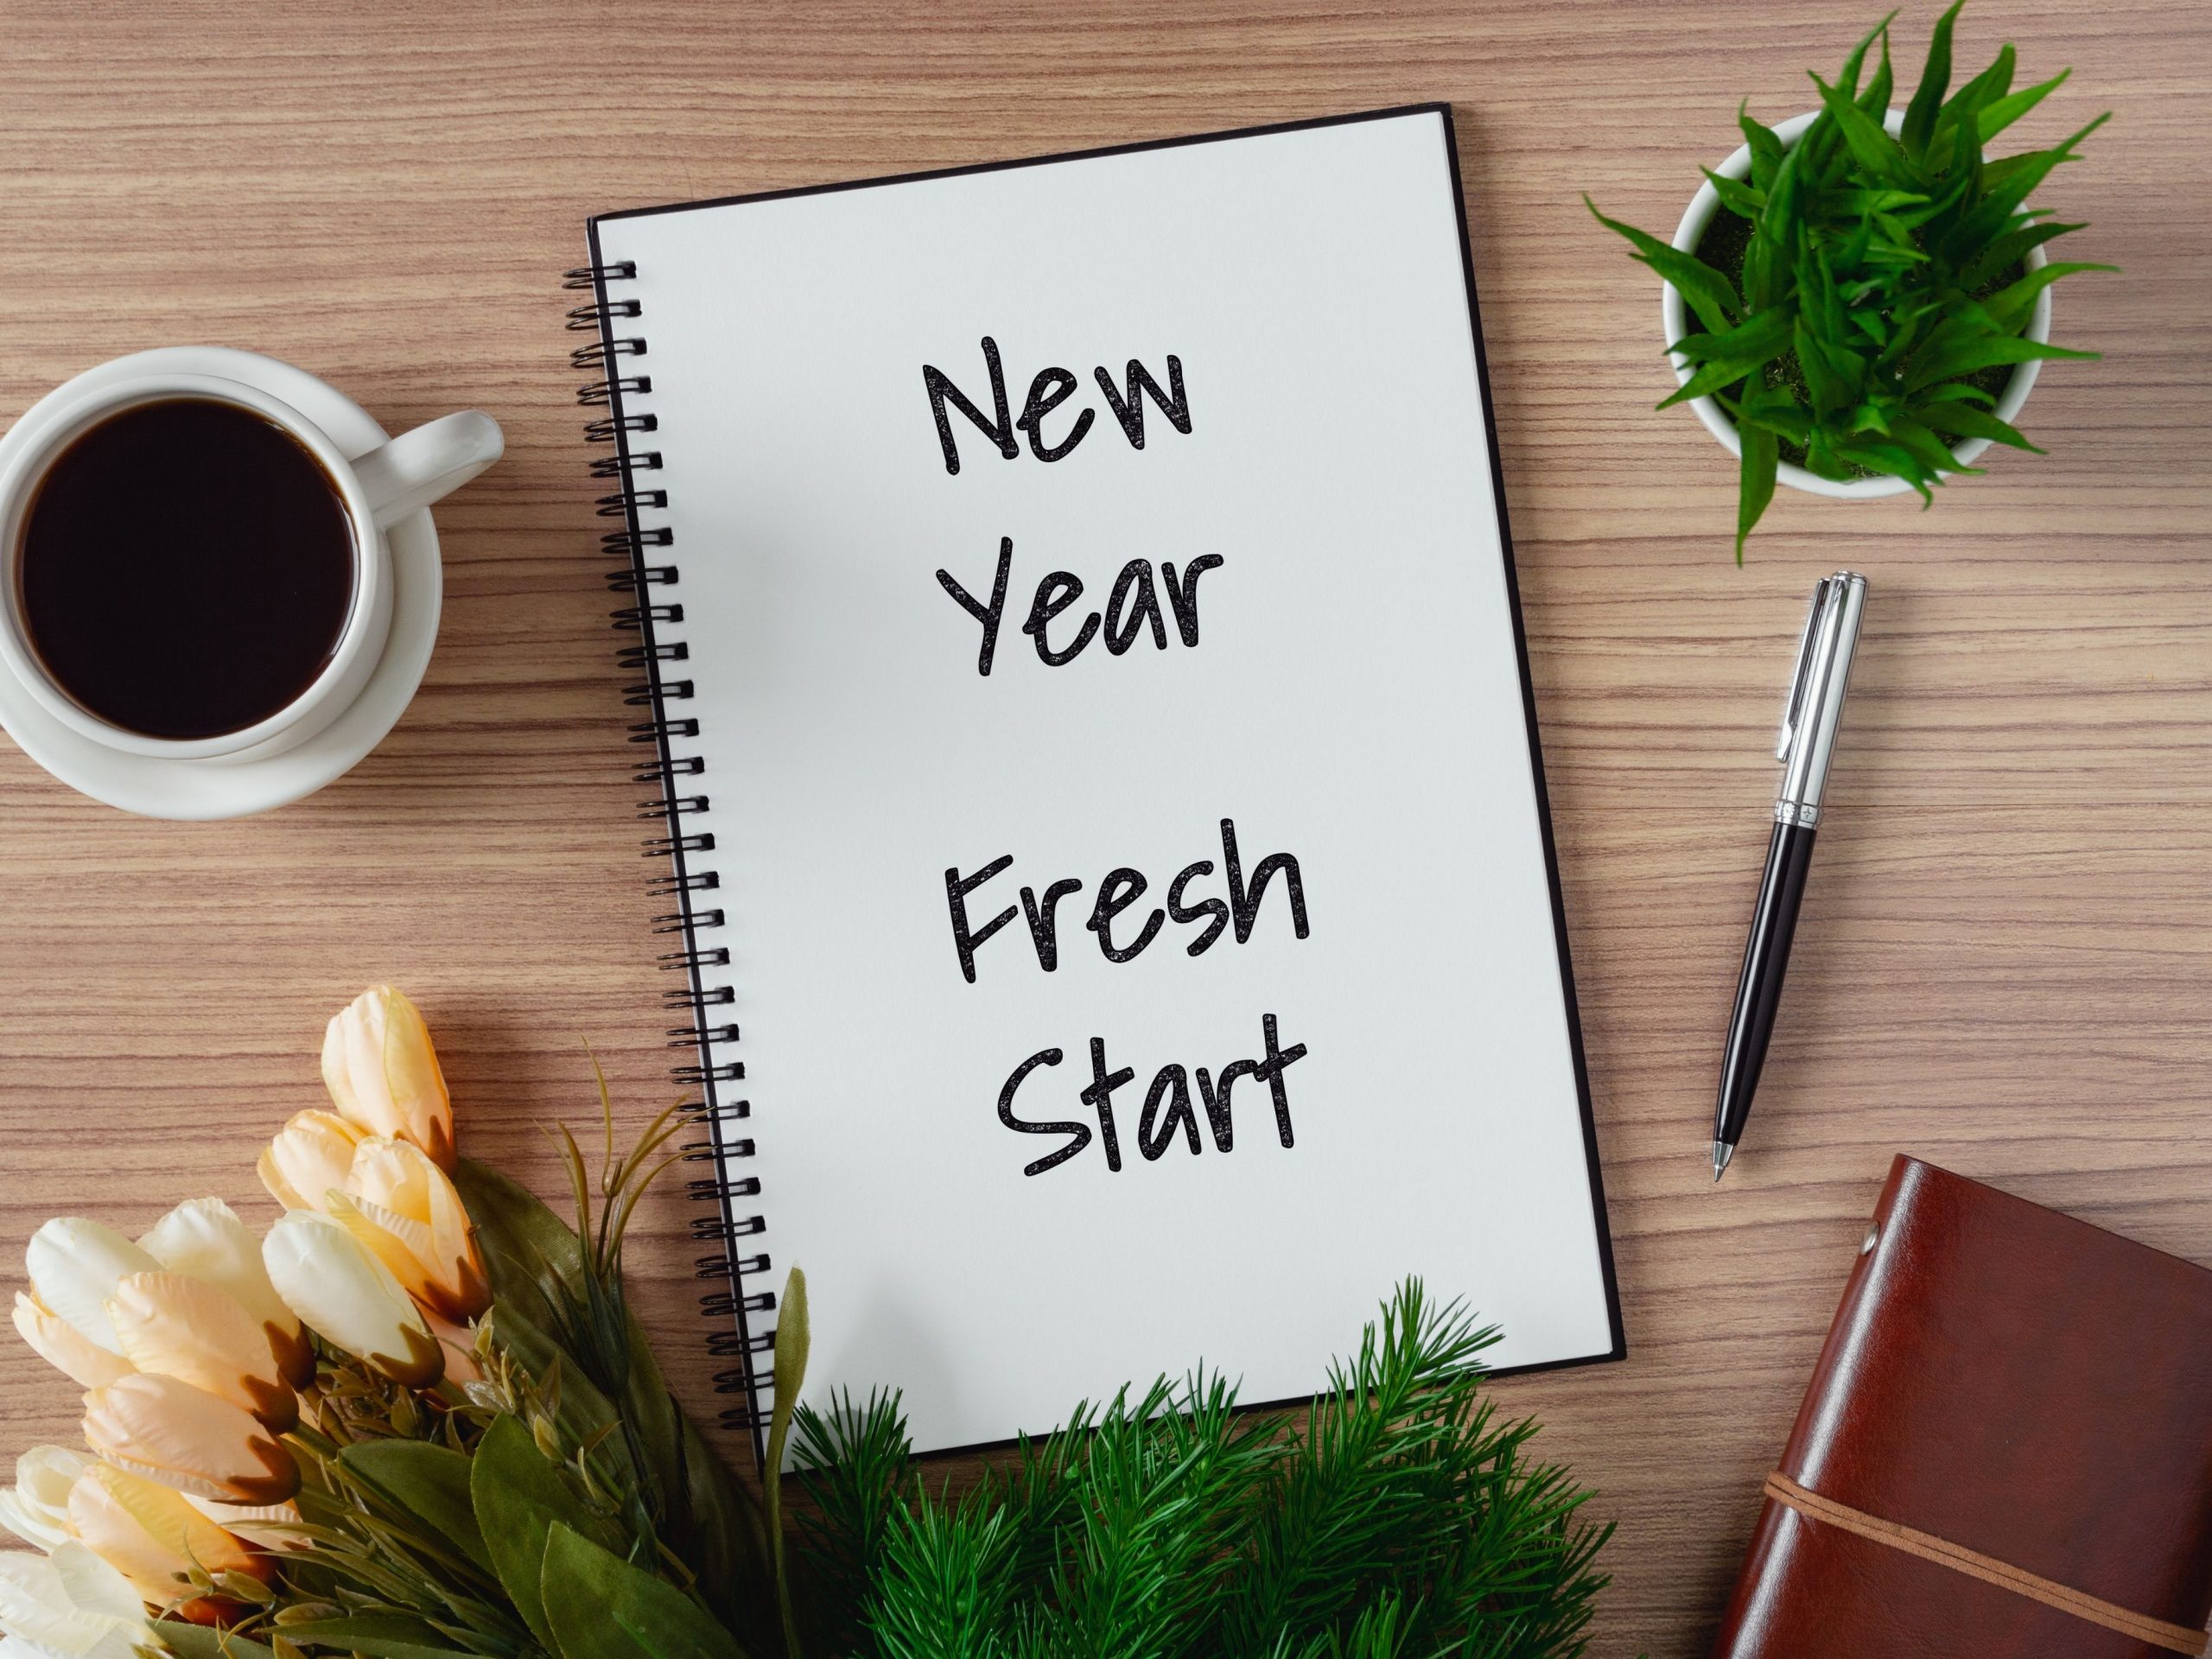 How to set fitness goals for the new year